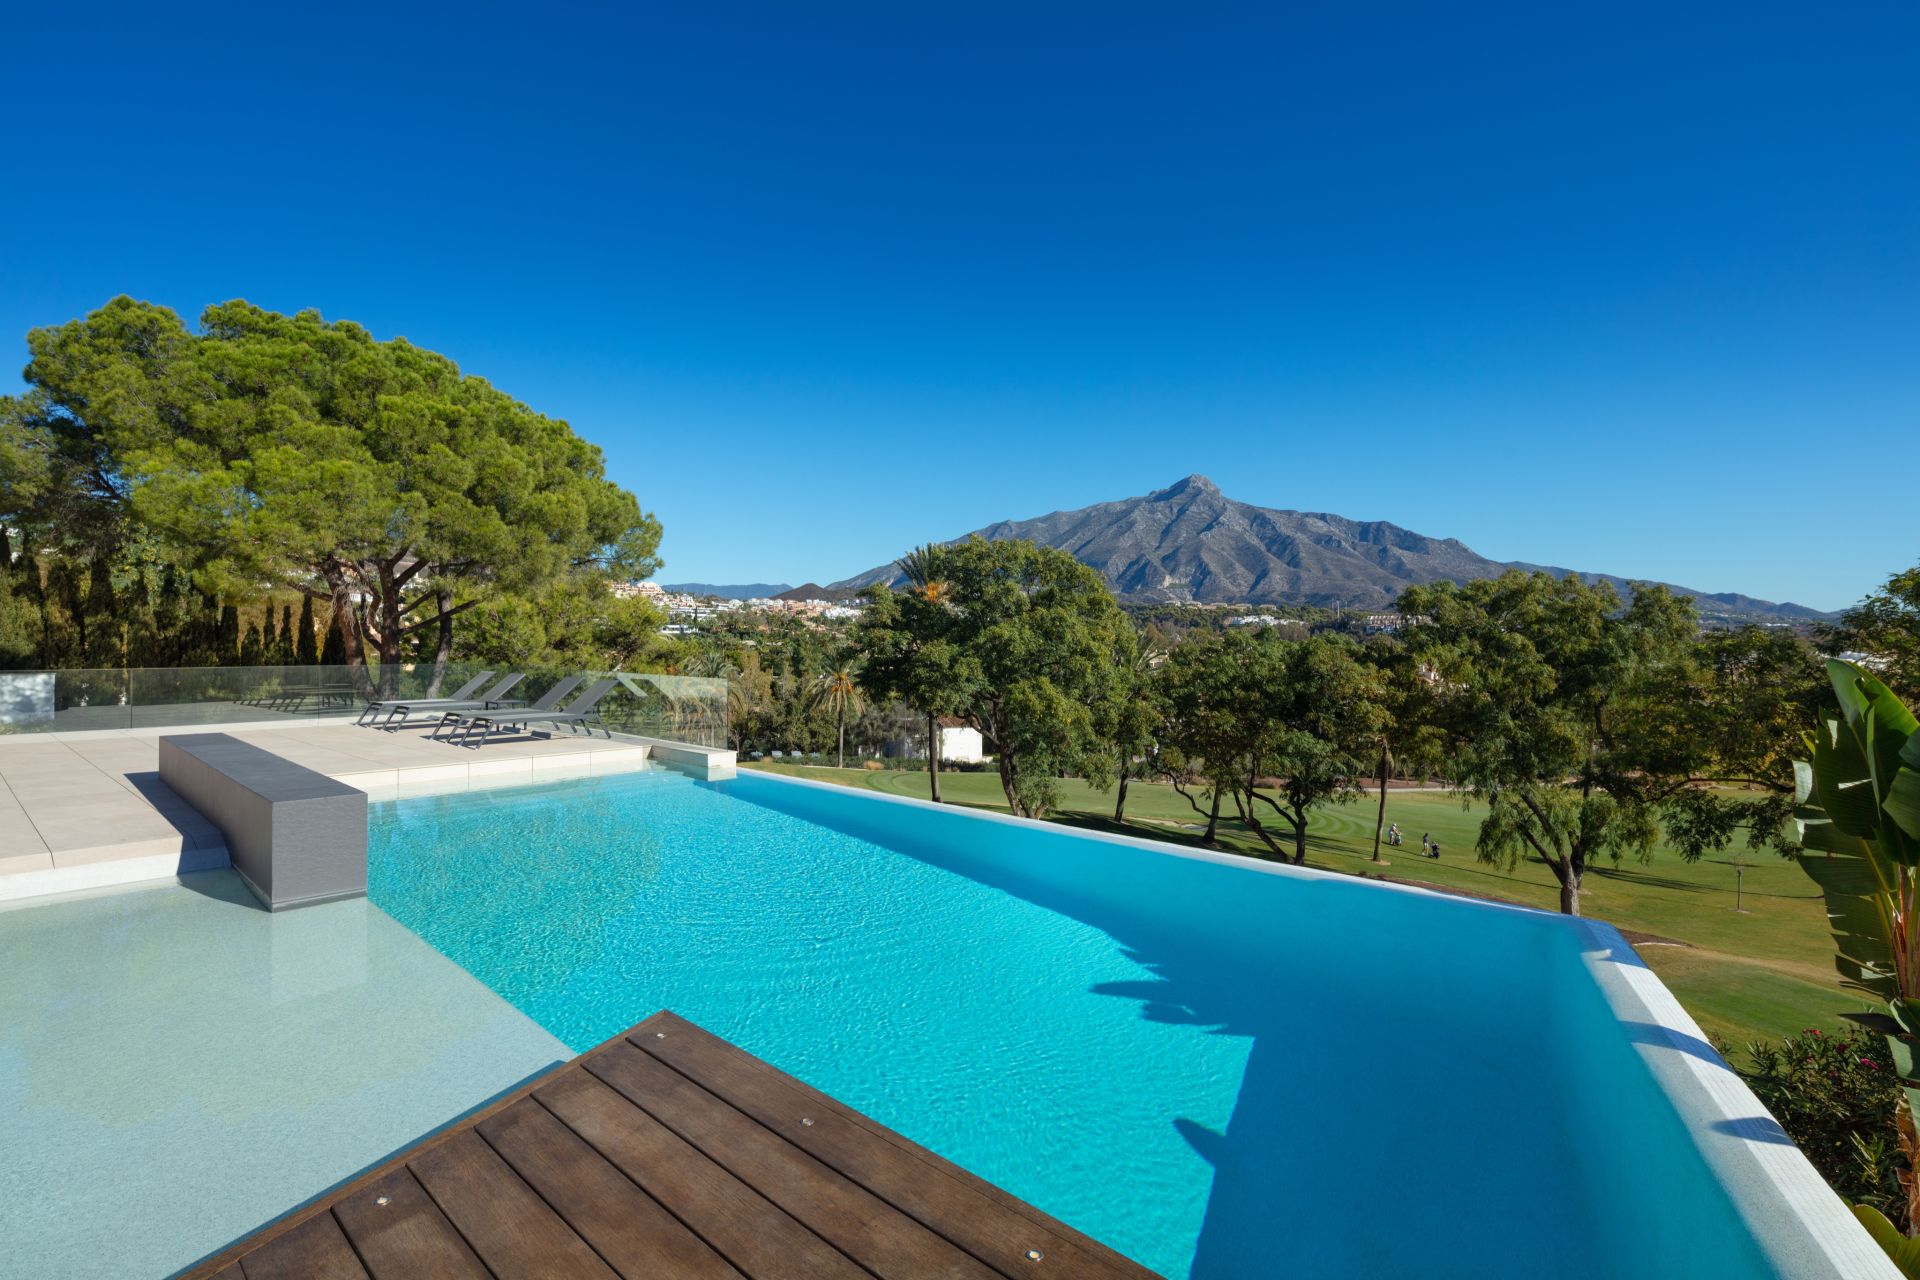 Costs of buying a luxury property in Marbella